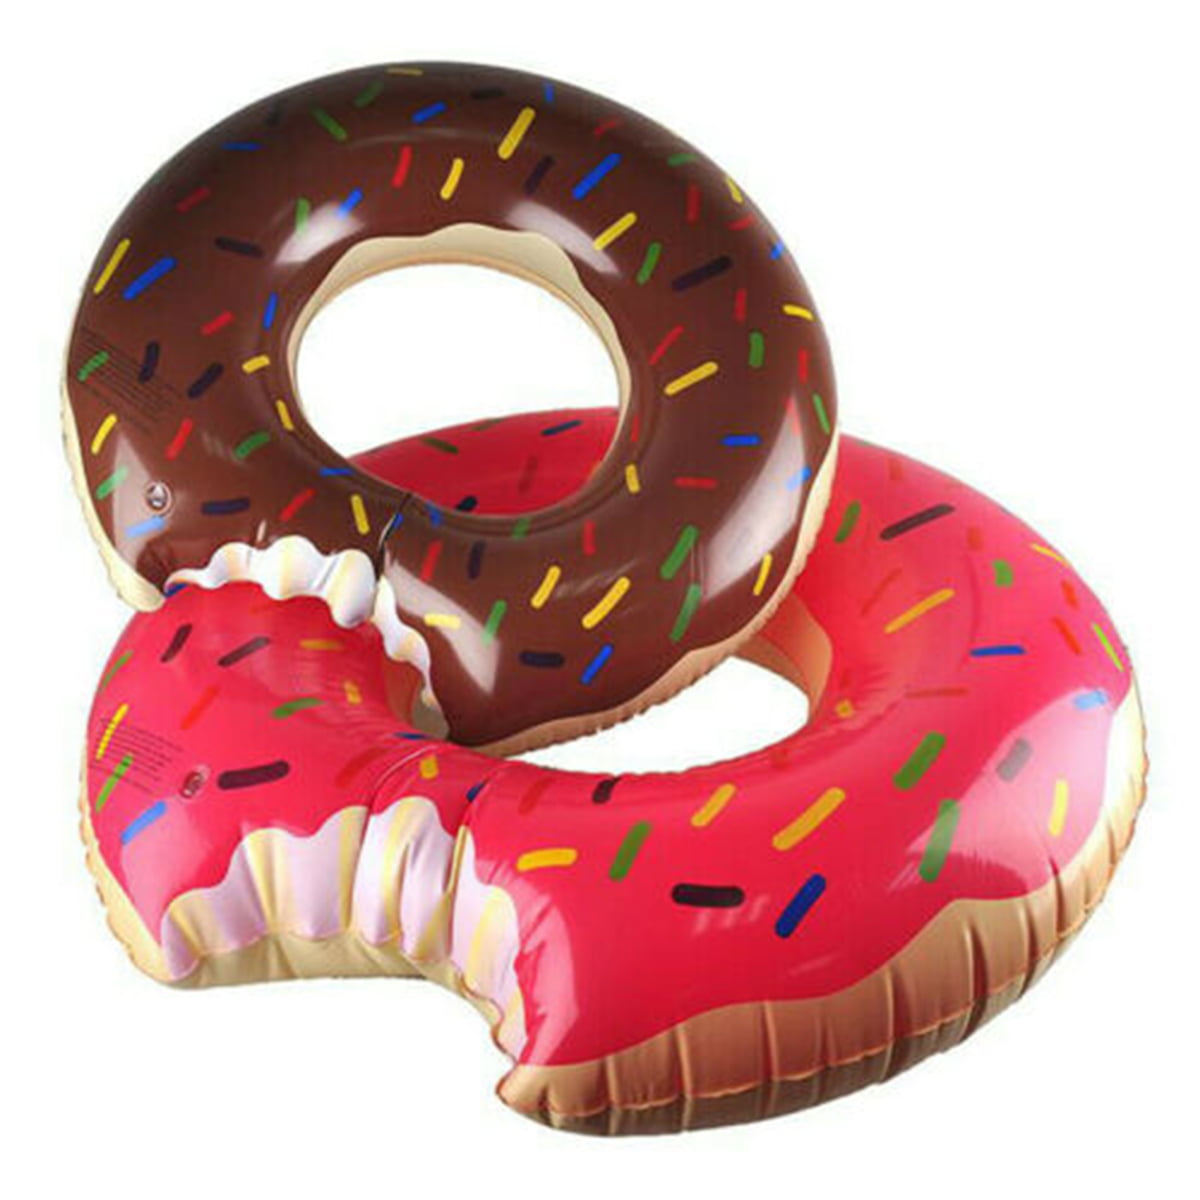 Chocolate Strawberry Donut Swim Ring FLOTADOR for Kids and Adults Yarssir Giant Donut Pool Float Funny Inflatable Vinyl Summer Pool Beach Toy Chocolate #80